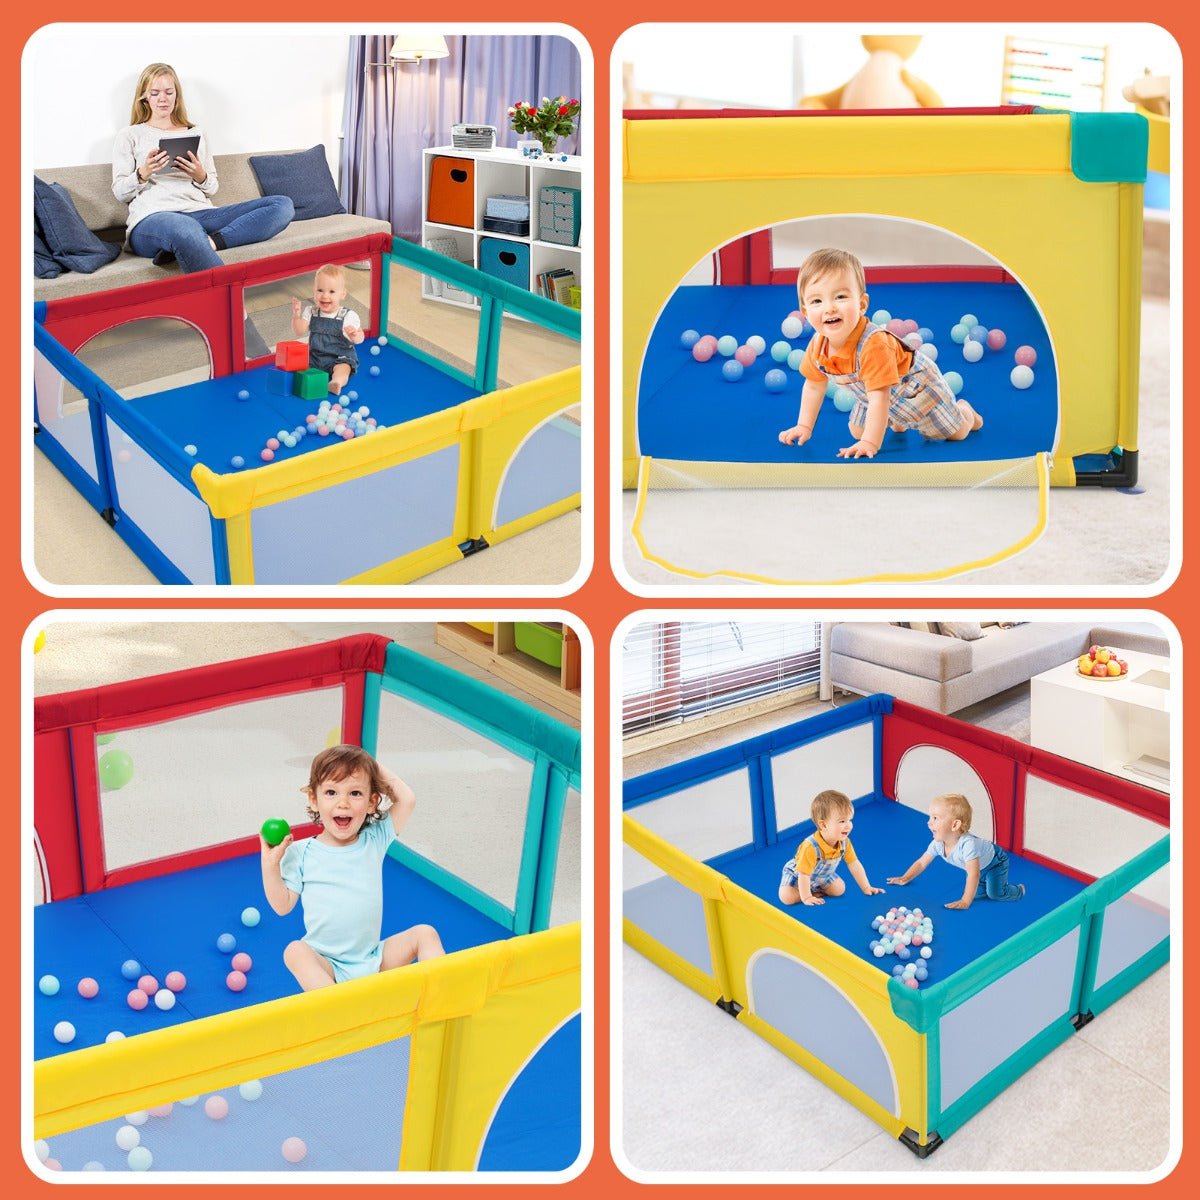 Extra Large Baby Playpen: Multicolour Design with Safety Gates & Mesh Walls